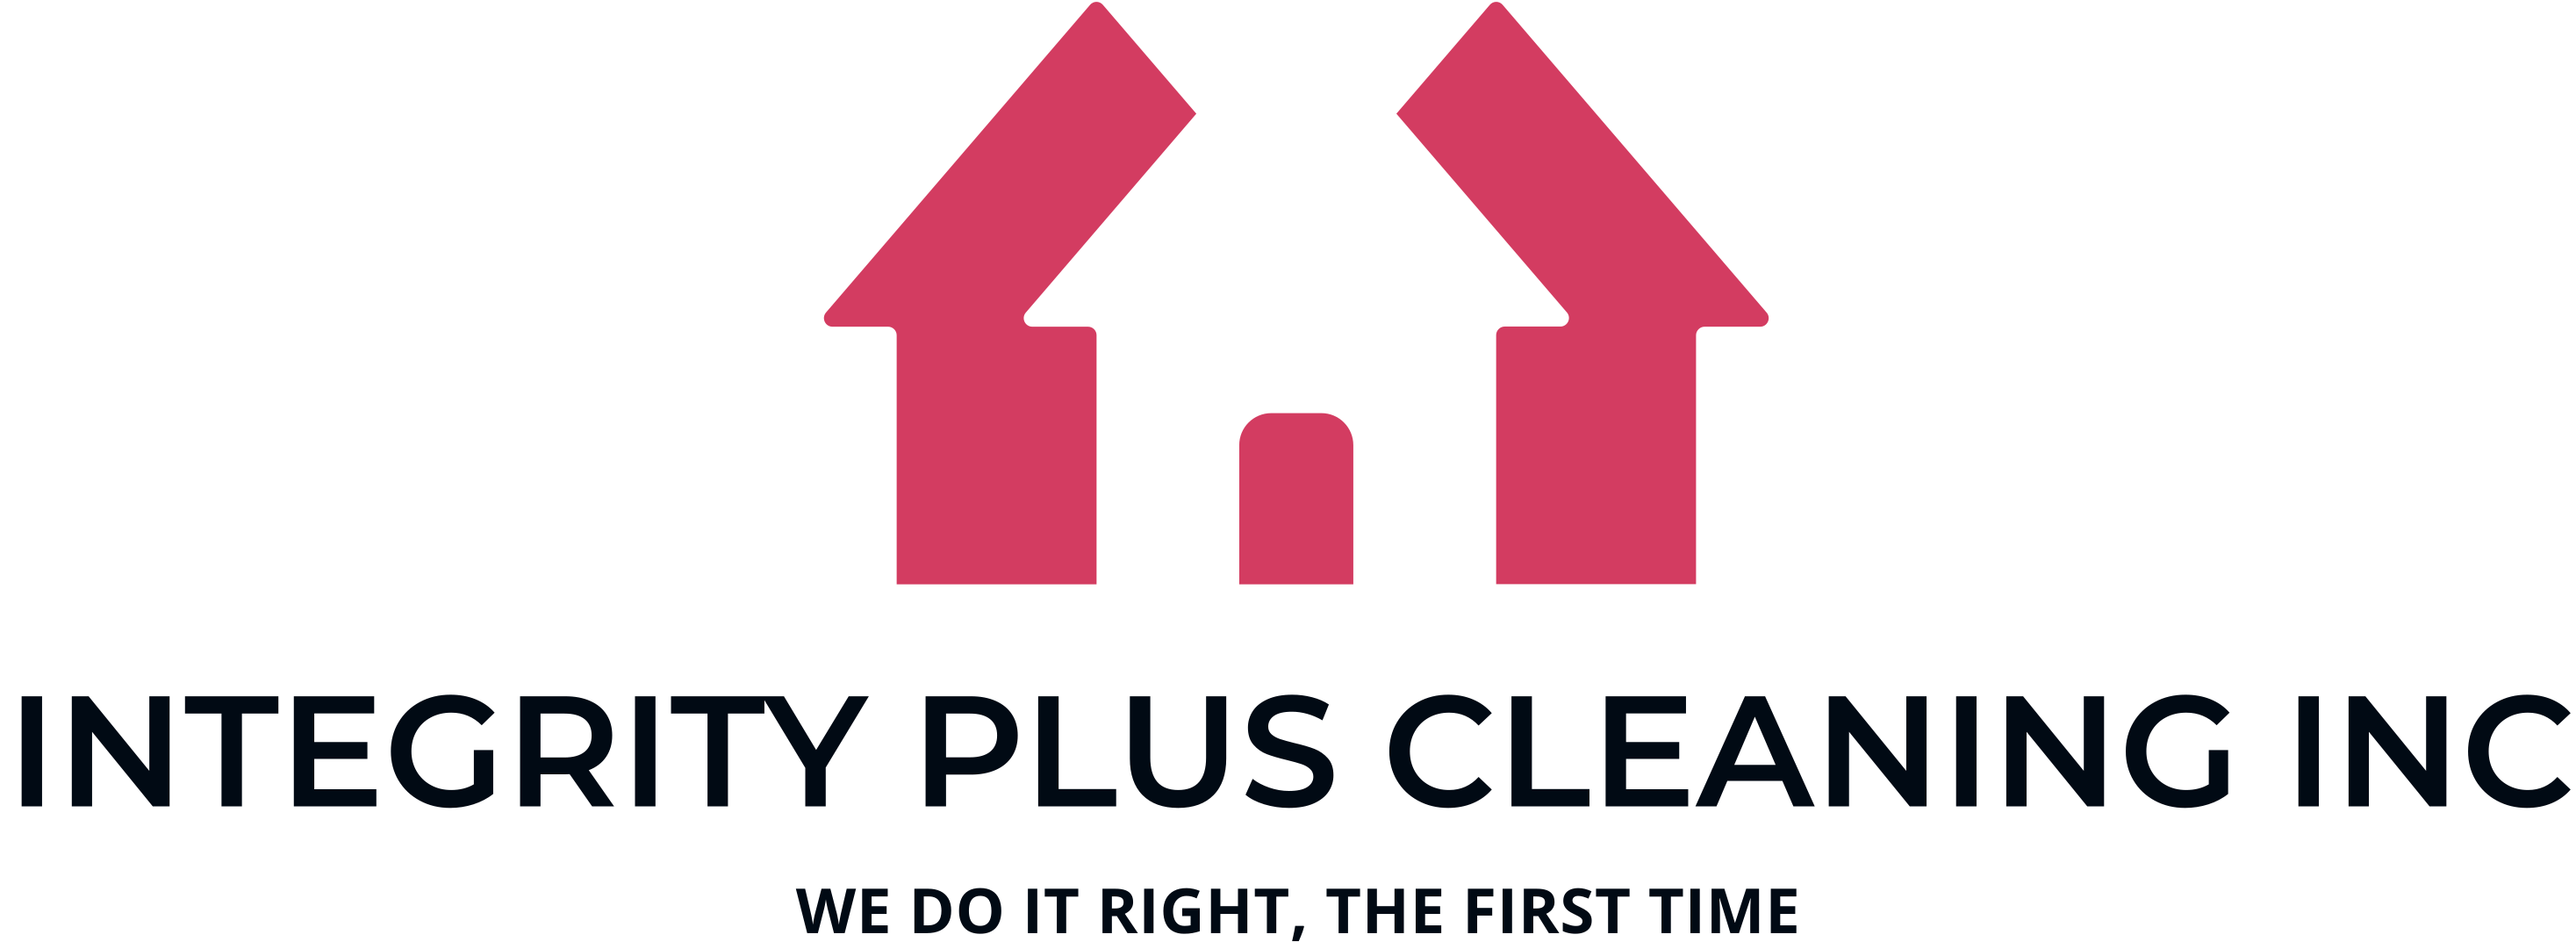 House image with business name Integrity Plus Cleaning inc with slogan "we do it right the first time!"